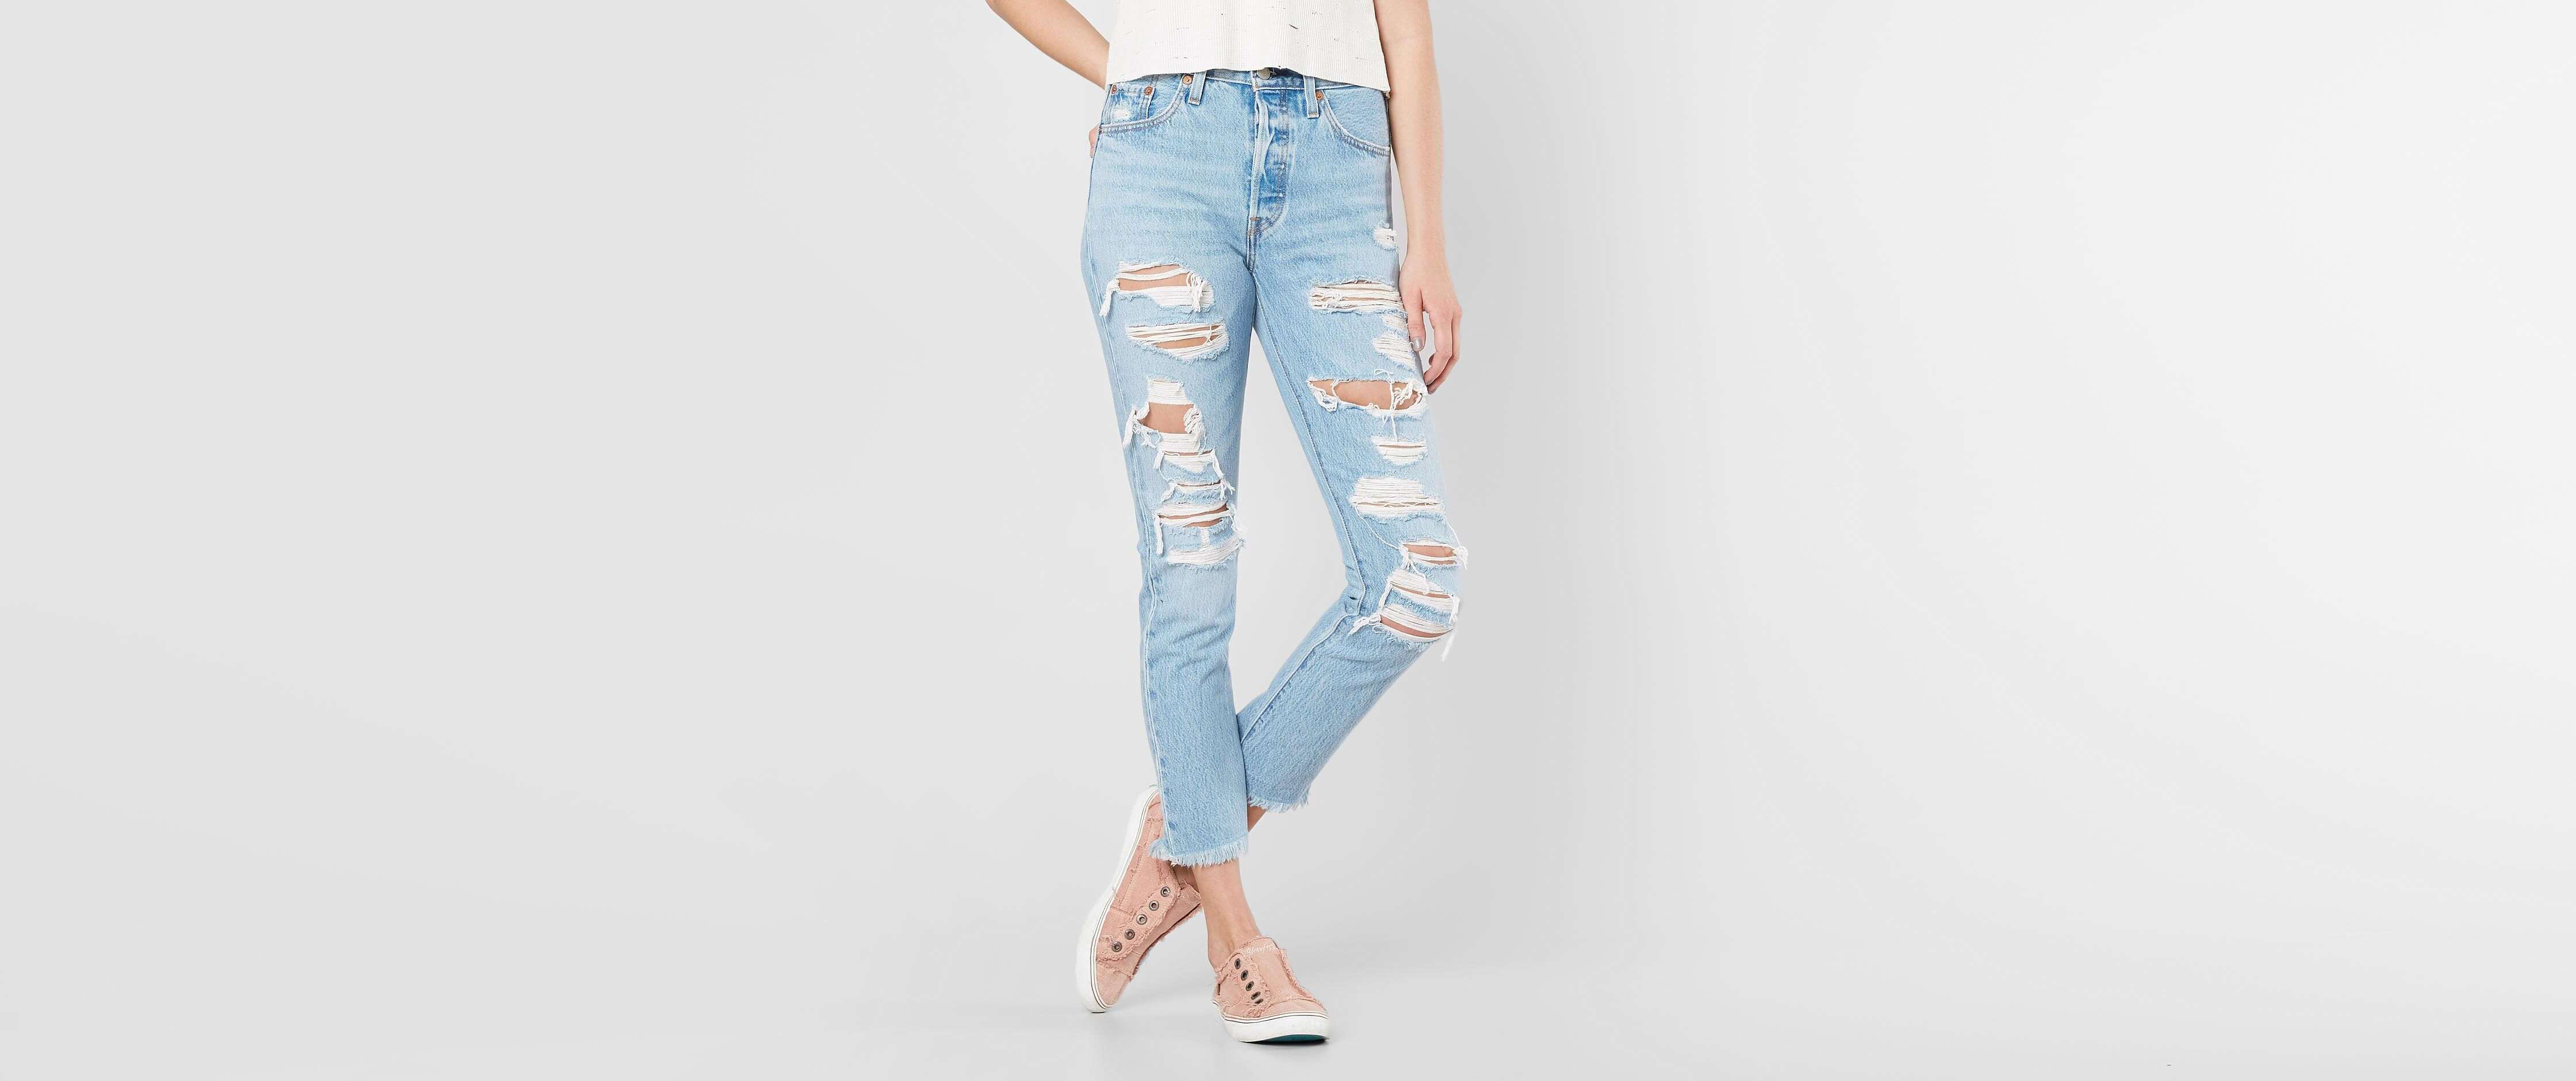 levi's ripped skinny jeans womens